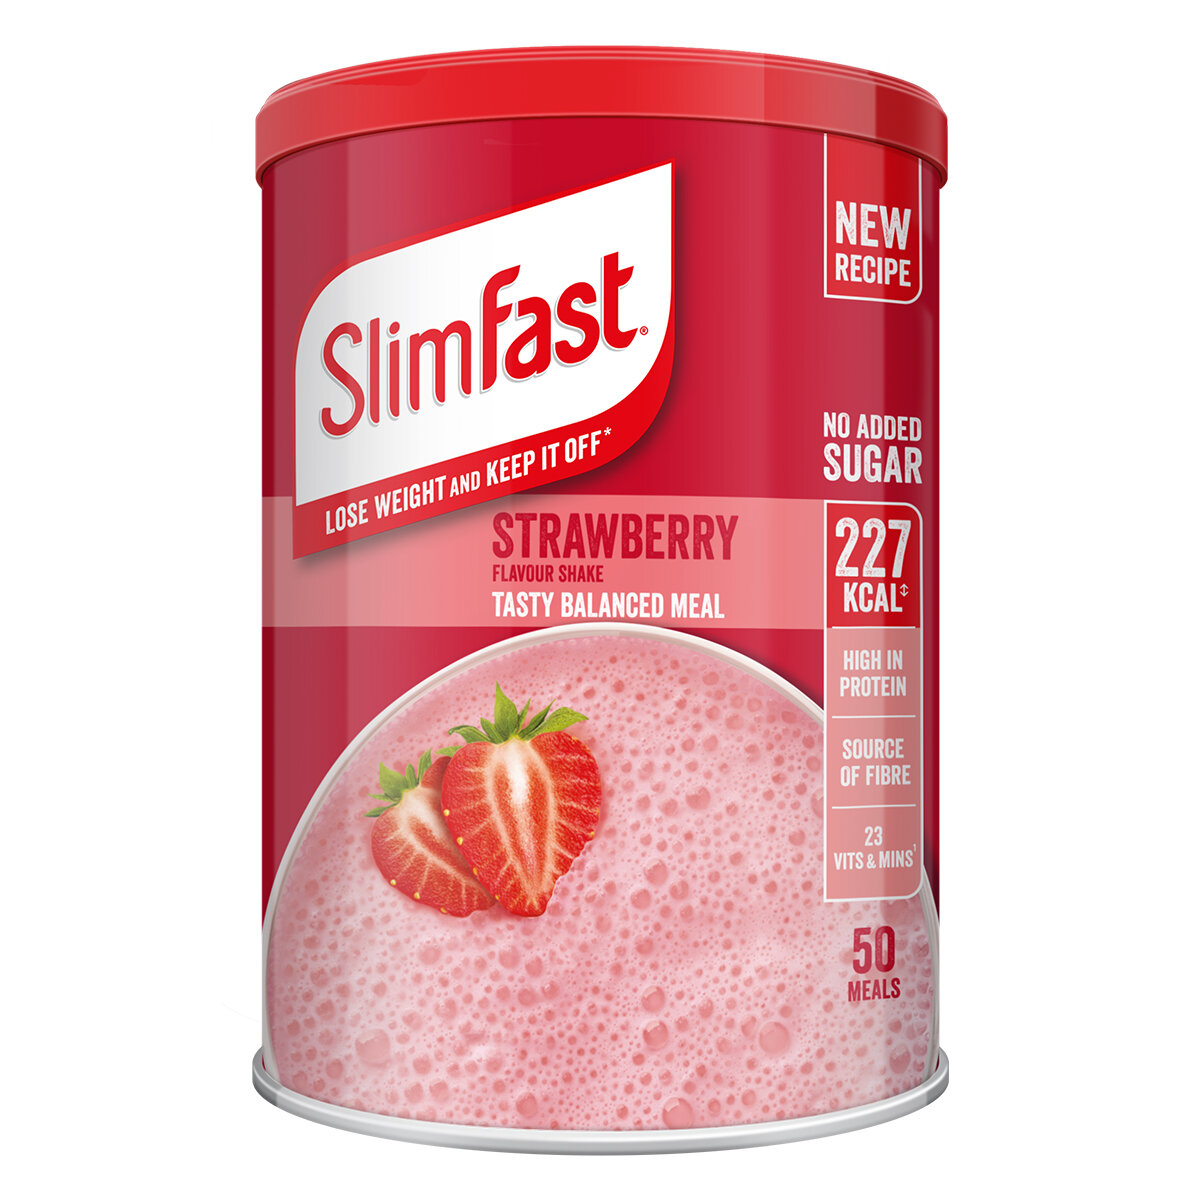 Pot of Slimfast protein powder red pot with strawberry shake on it